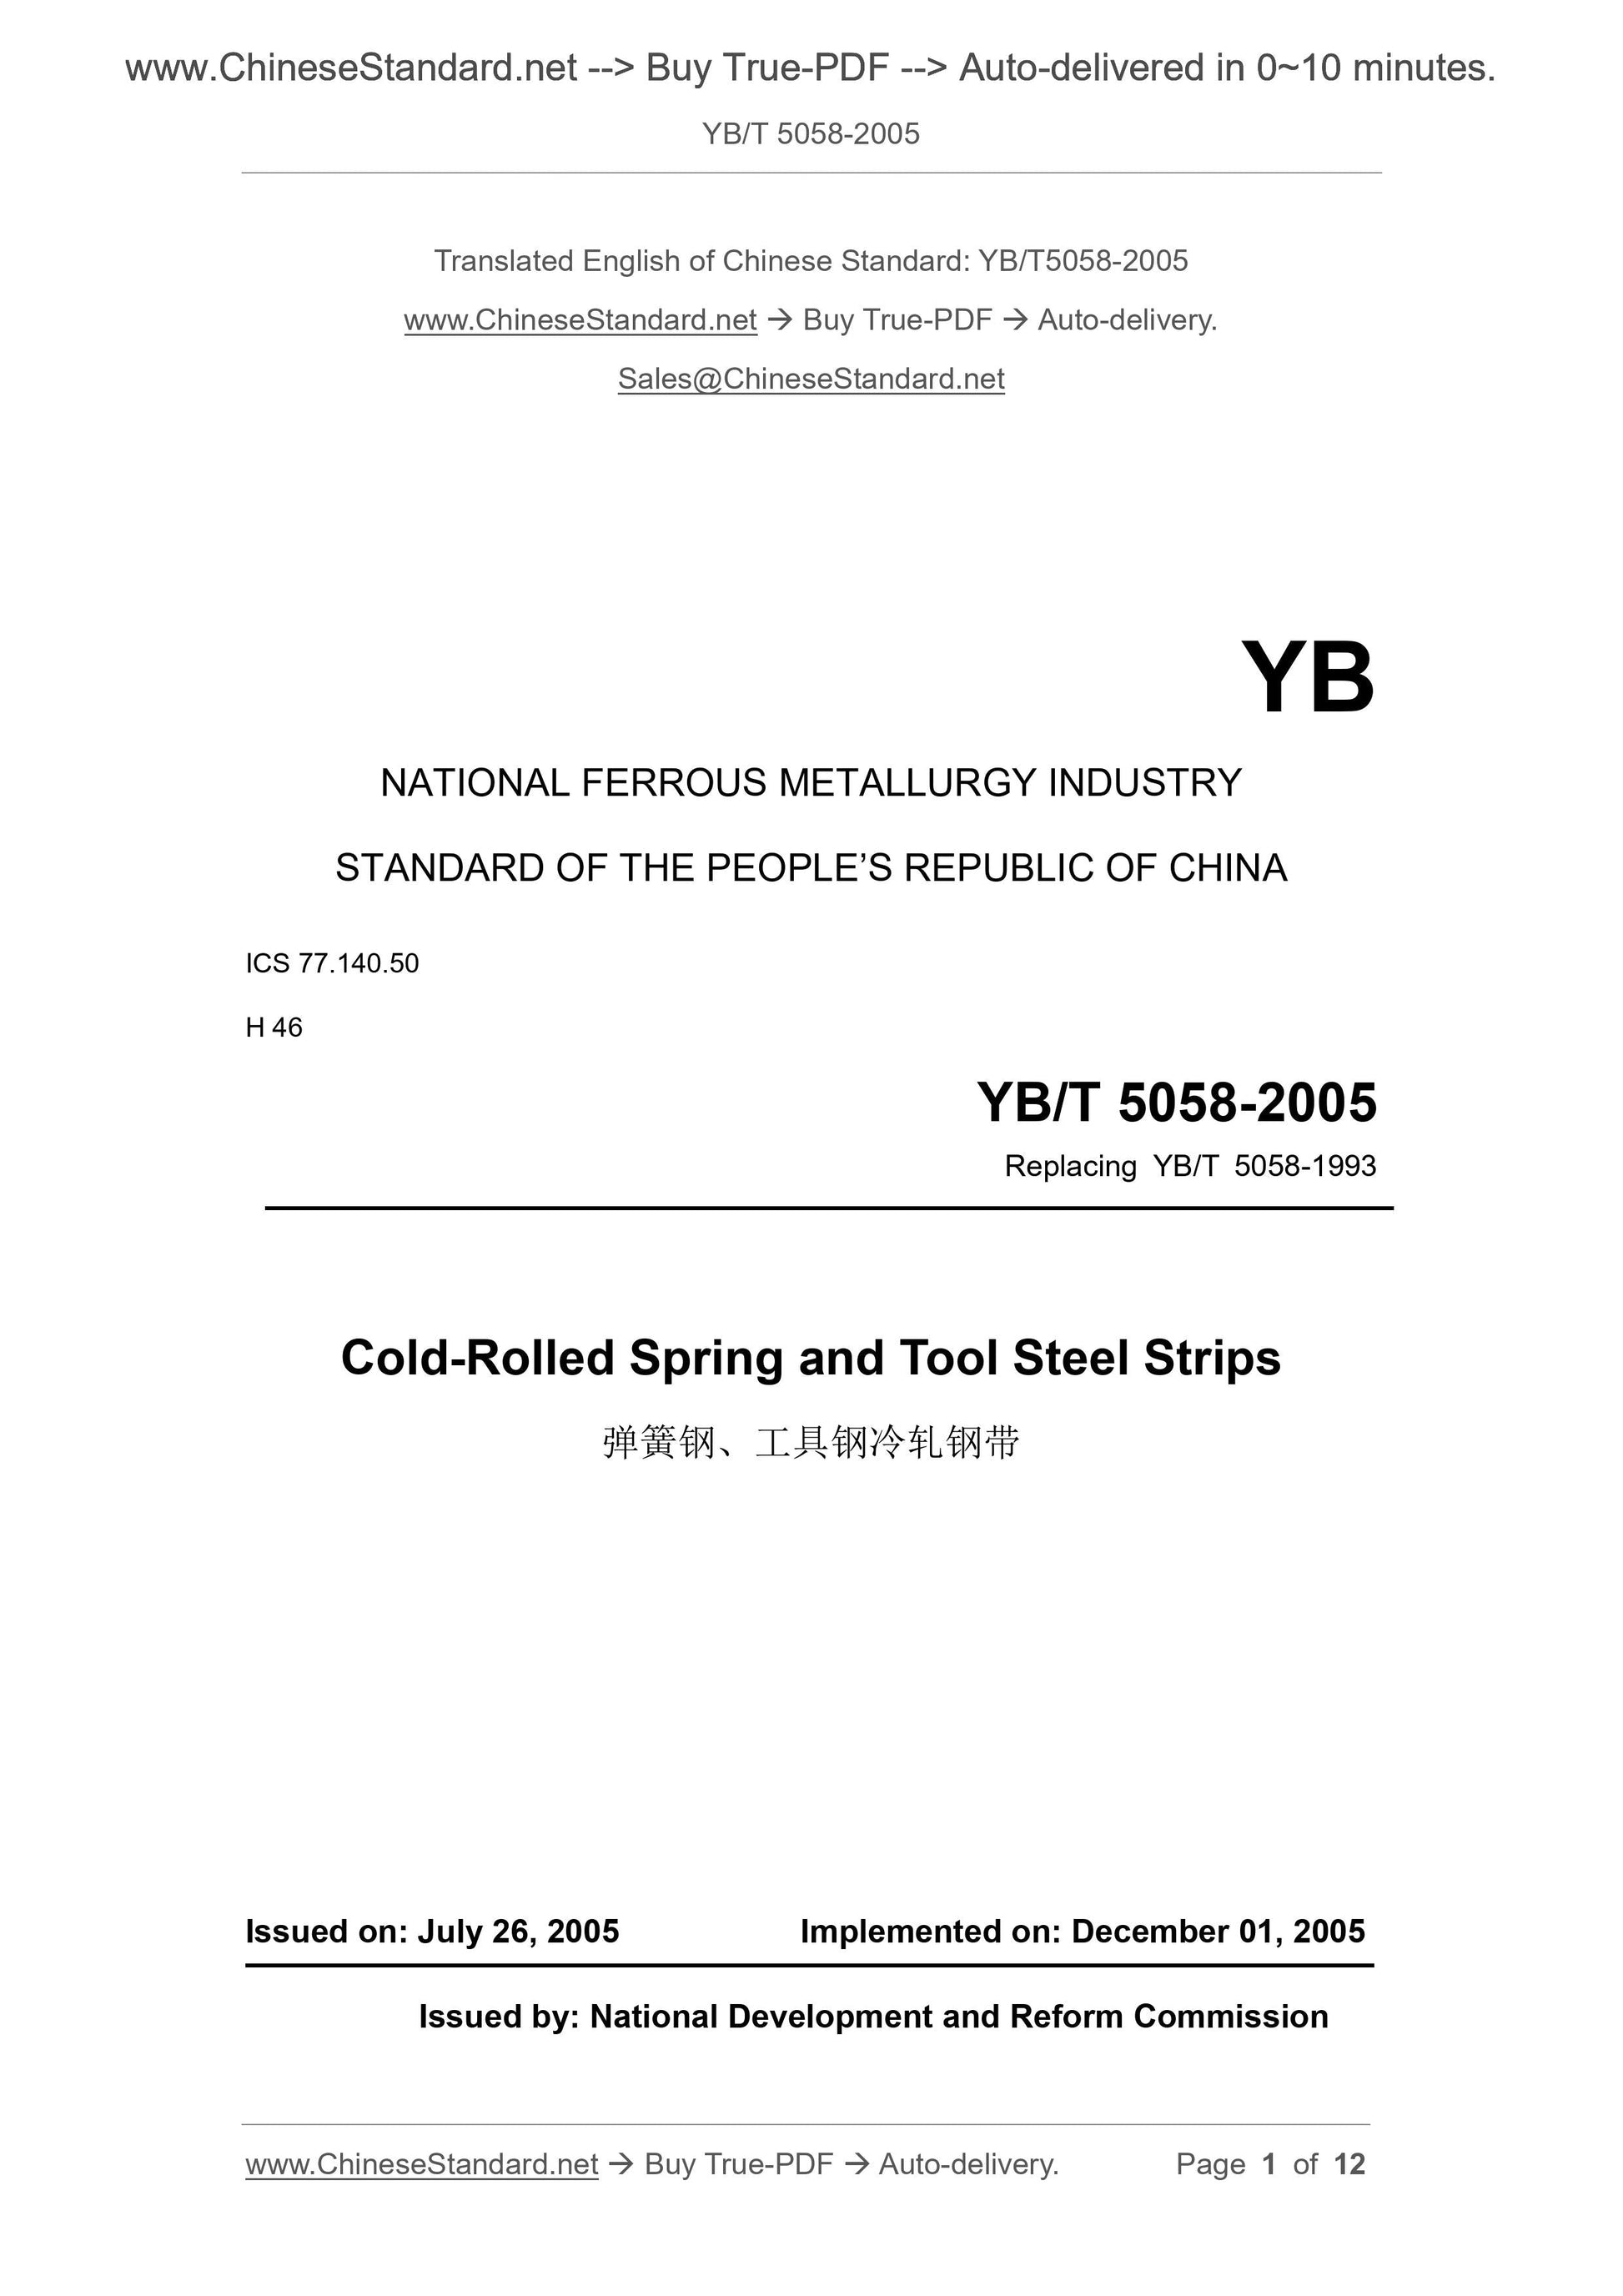 YB/T 5058-2005 Page 1